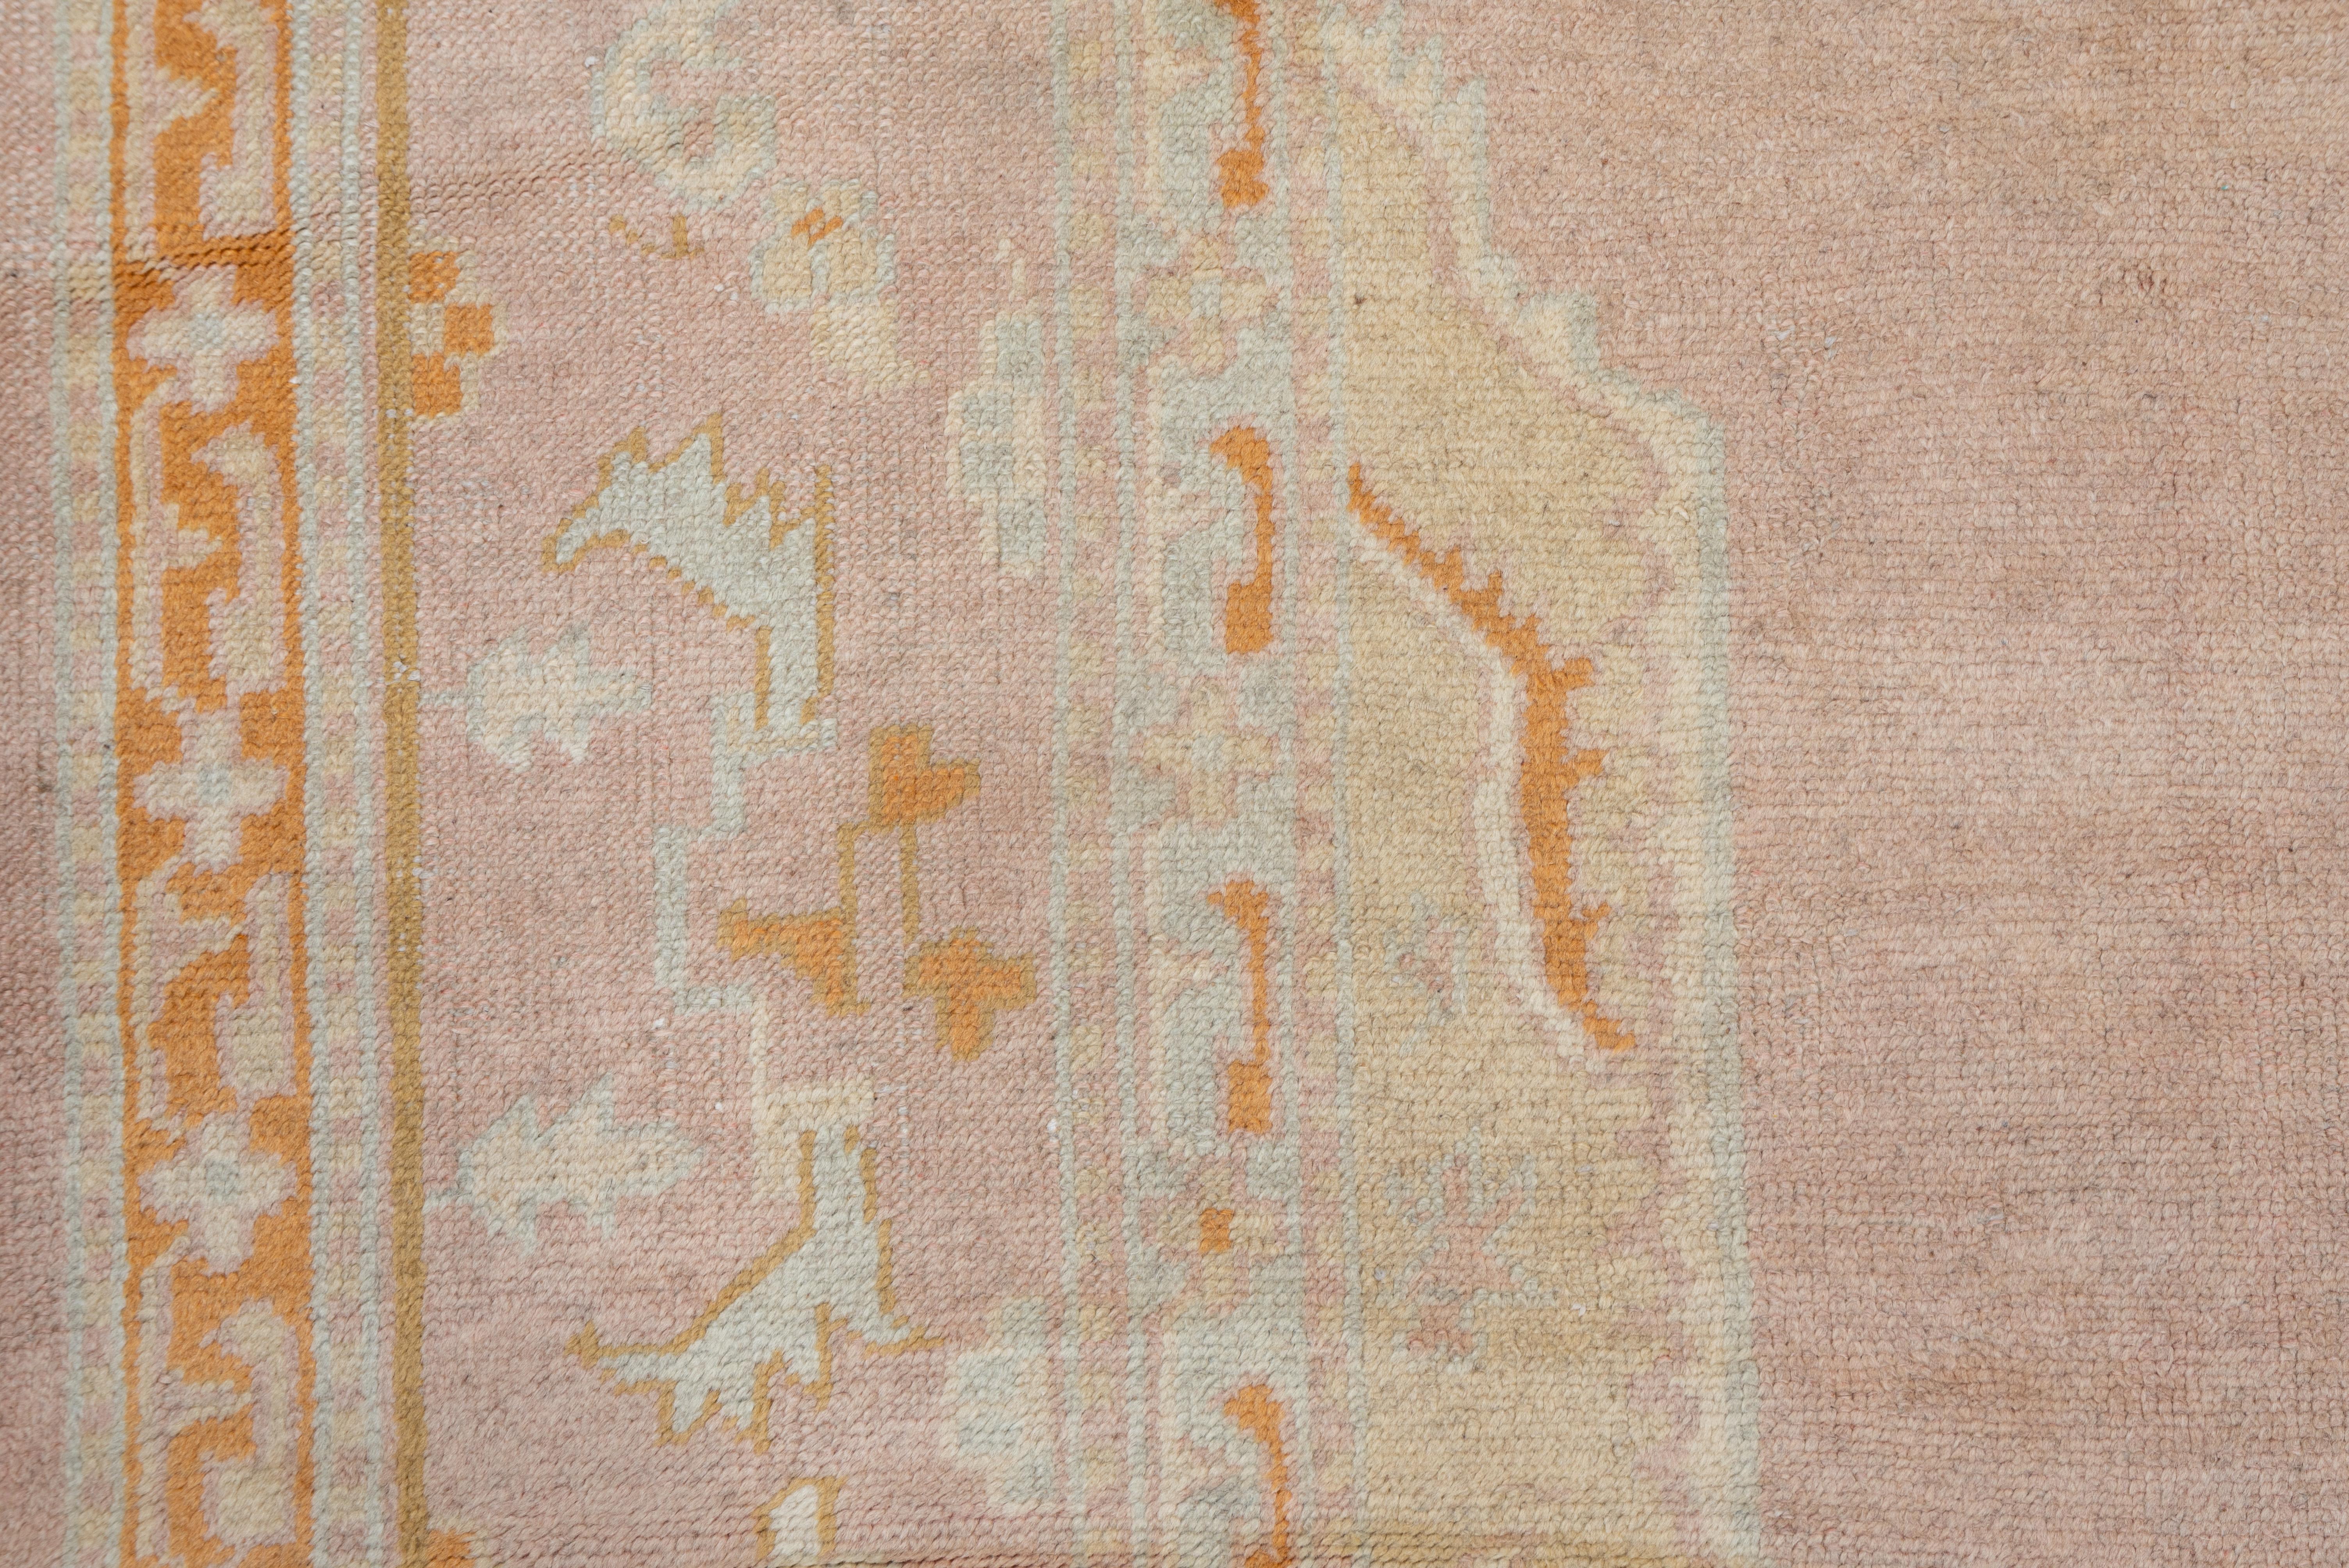 Wool Antique Pink Turkish Oushak Carpet with Orange & Yellow Accents, circa 1920s For Sale